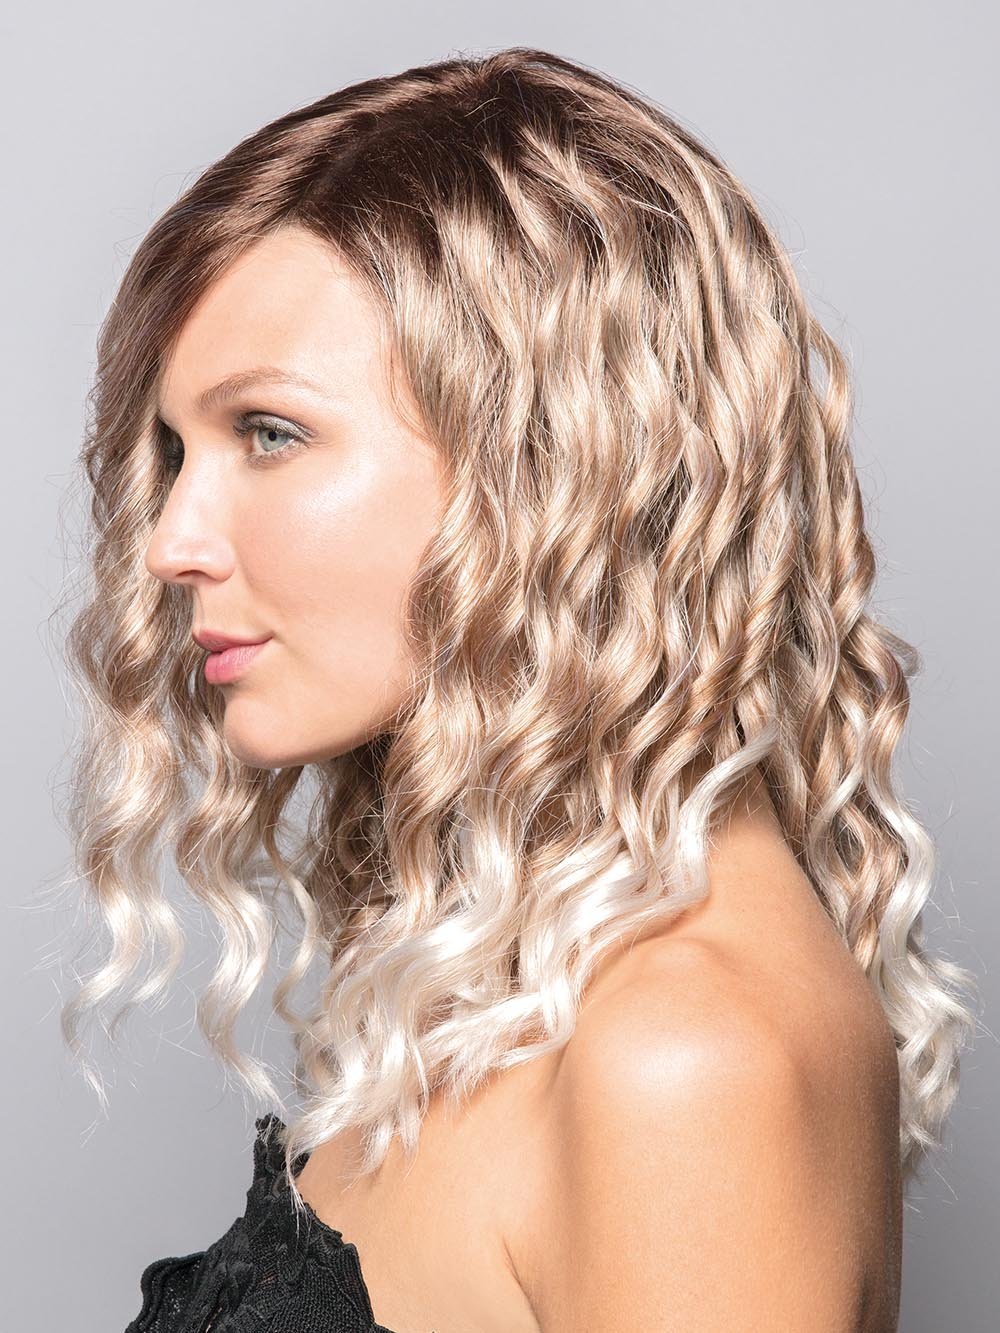 Curls that are sure to fall loosely past the shoulders